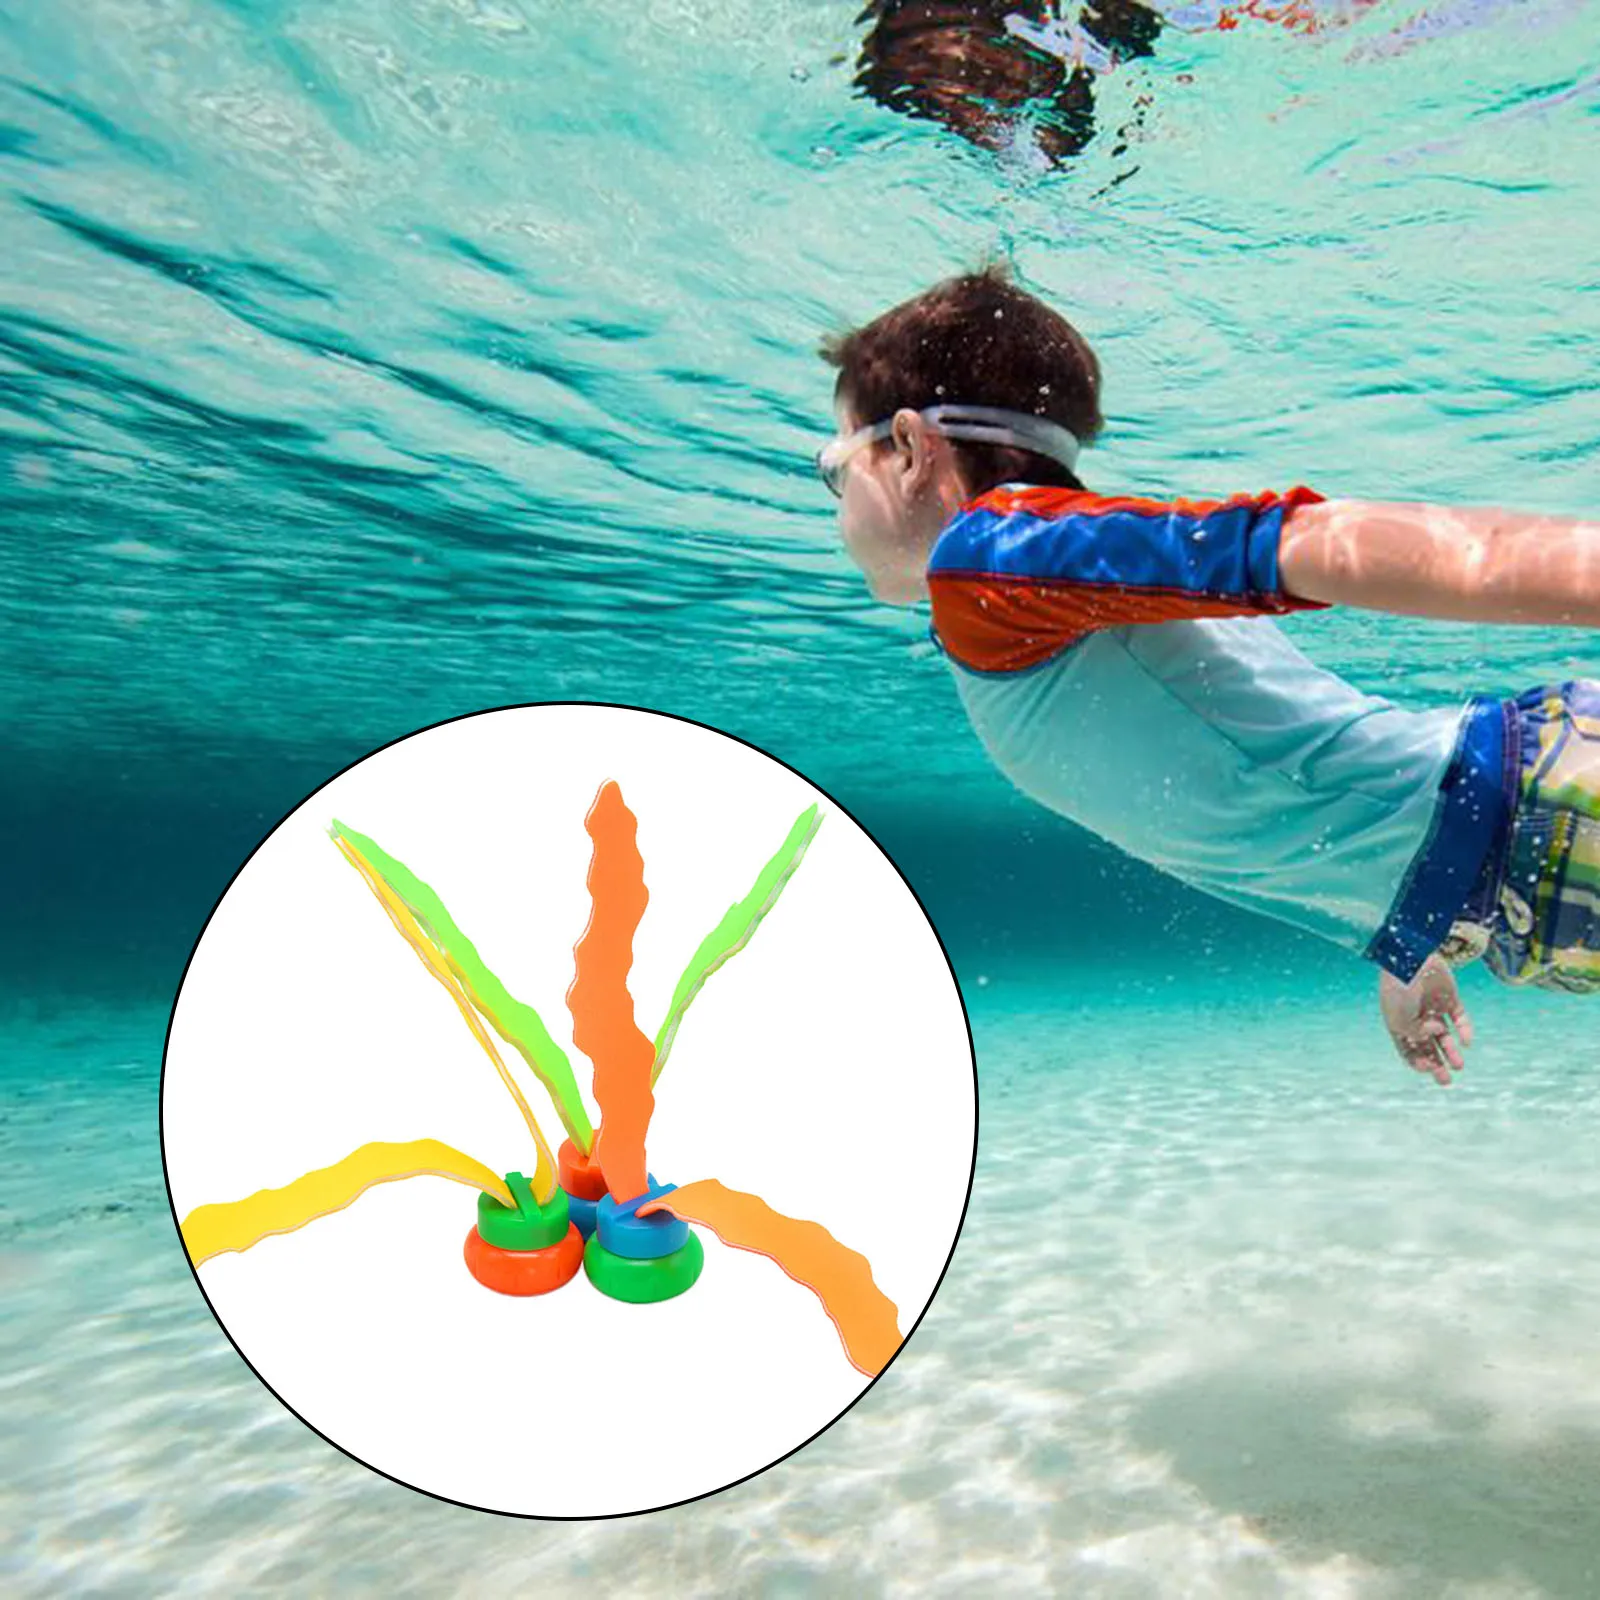 Seaweed Toy Kids Plants Diving Toy Outdoor Sea Plant Underwater Sinking Pool for Boys Girls